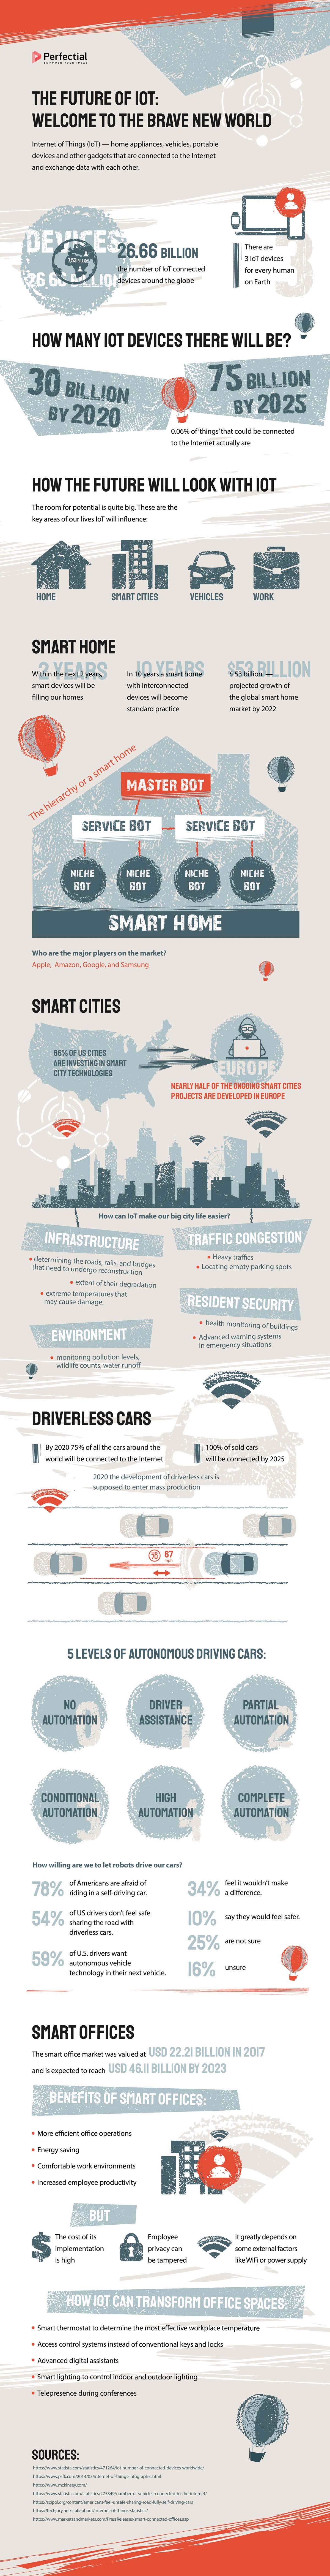 The Bright Future of IoT and How it Will Change Our Lives #infographic